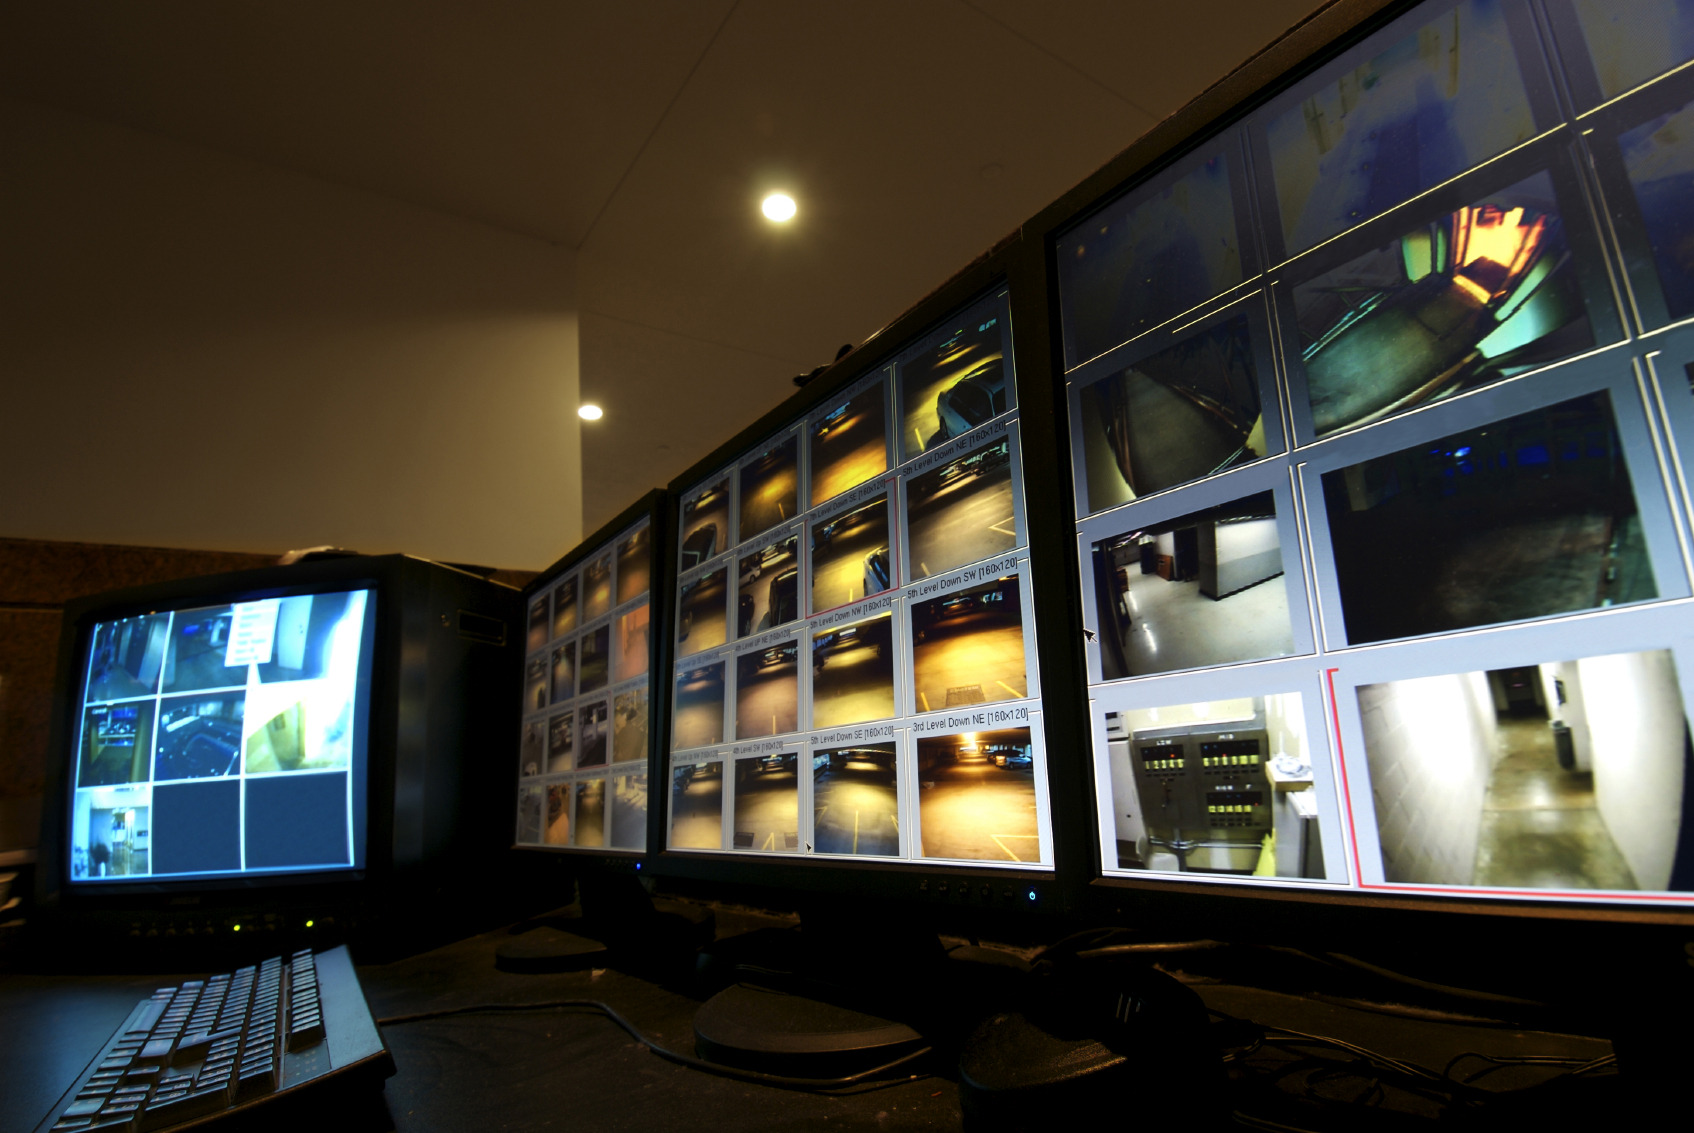 Choosing A Supplier Of CCTV Systems – What To Watch For